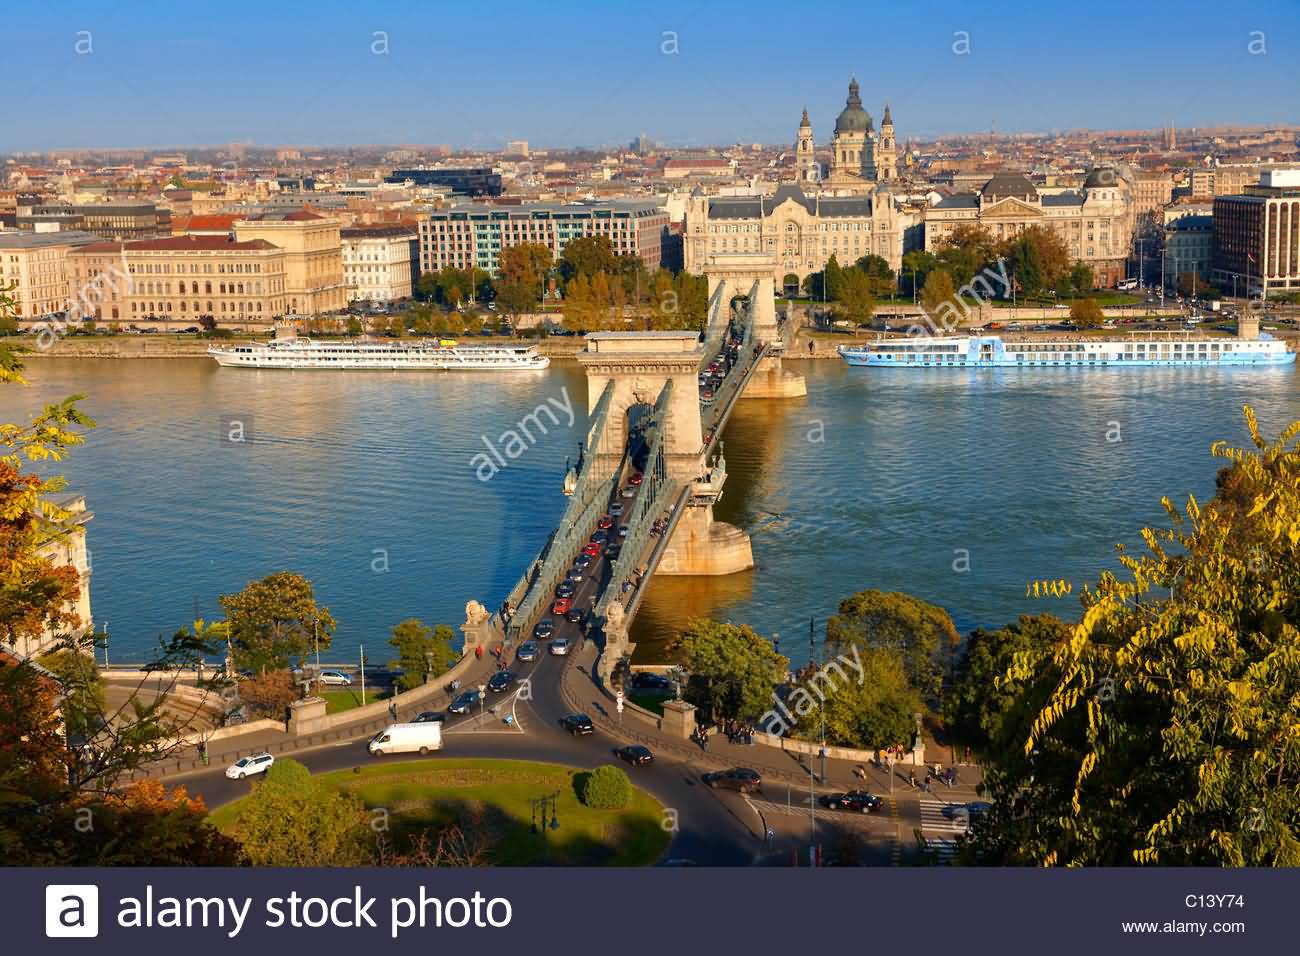 View Across The Danube To Pest From The Buda Castle With The Szecheni Chain Bridge